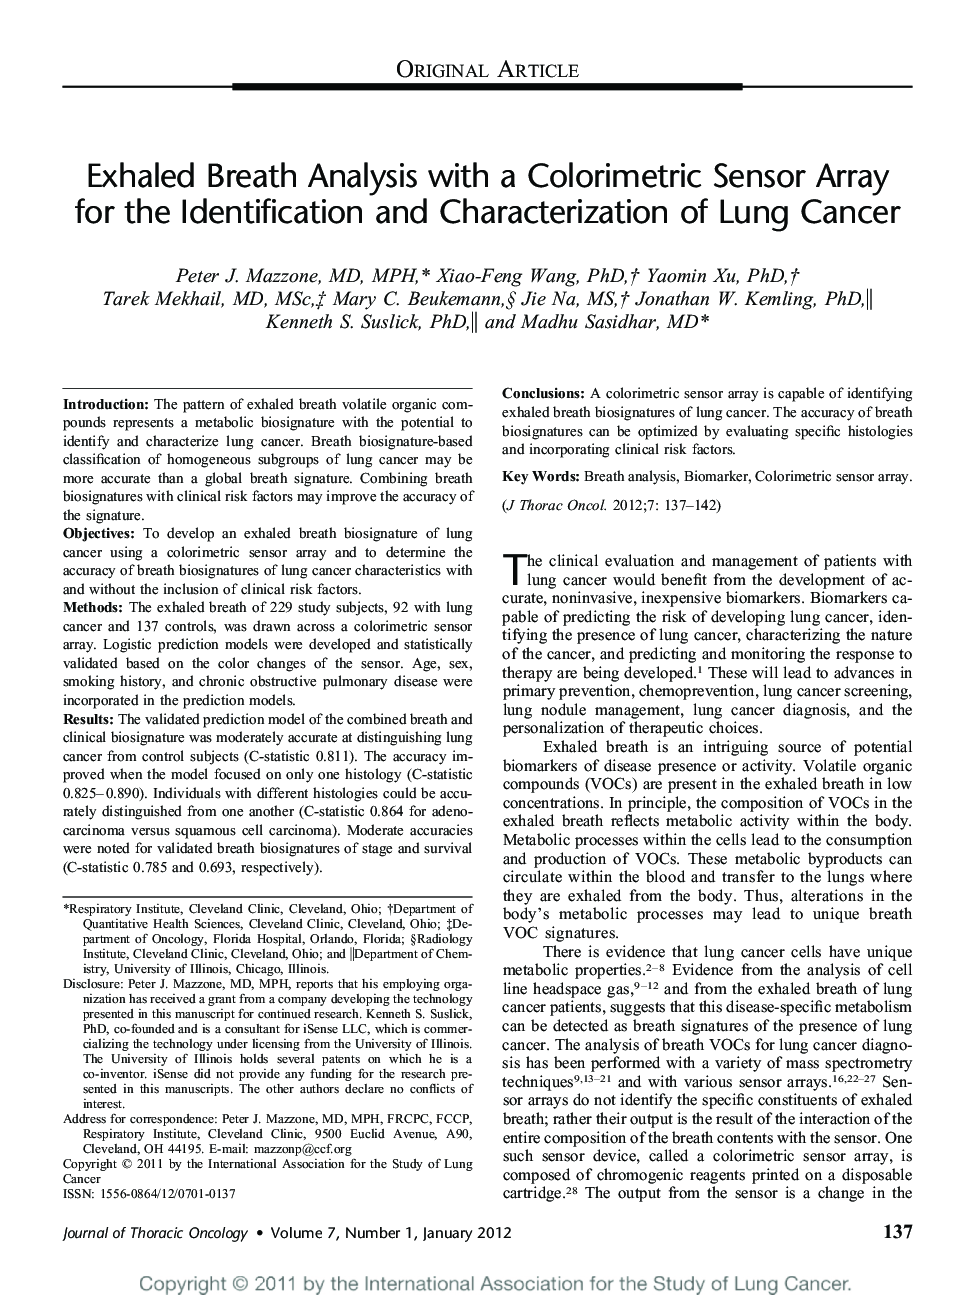 Exhaled Breath Analysis with a Colorimetric Sensor Array for the Identification and Characterization of Lung Cancer 